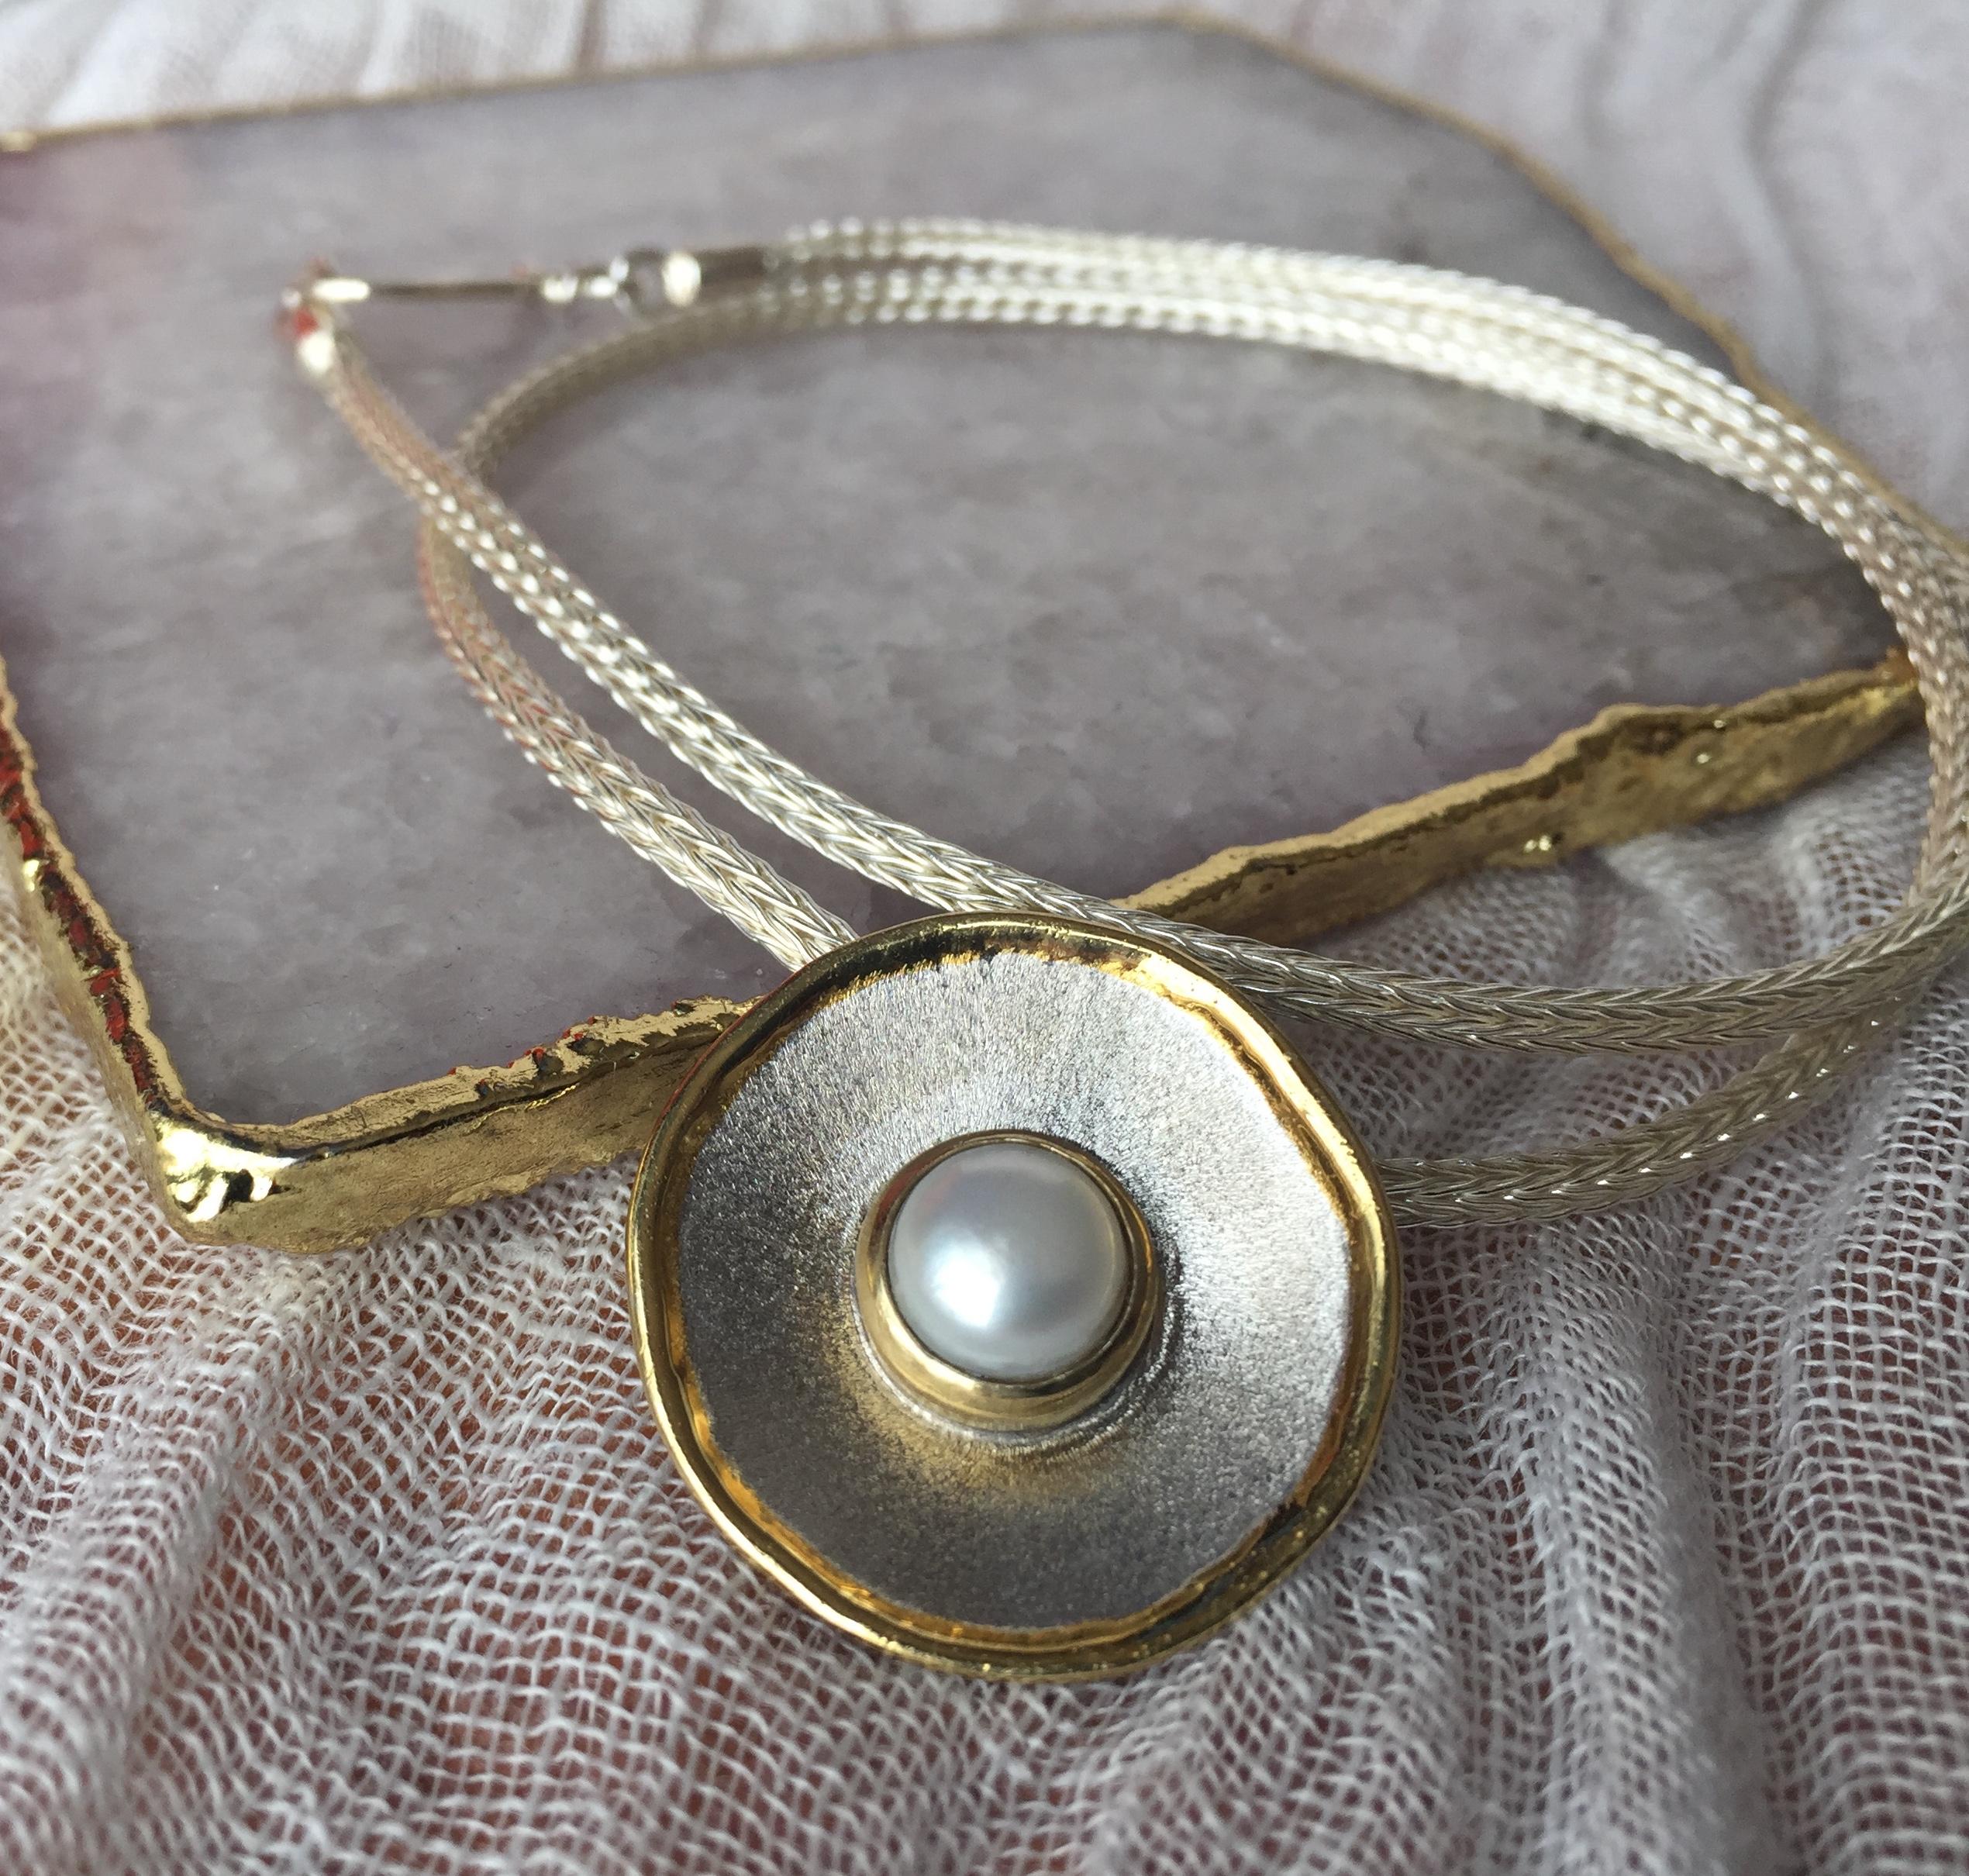 From Yianni Creations Midas Collection, this is handmade artisan slide from fine silver 950 purity and plated with palladium to resist against elements. This pendant enhancer features 8mm round freshwater pearl on the brushed background and the